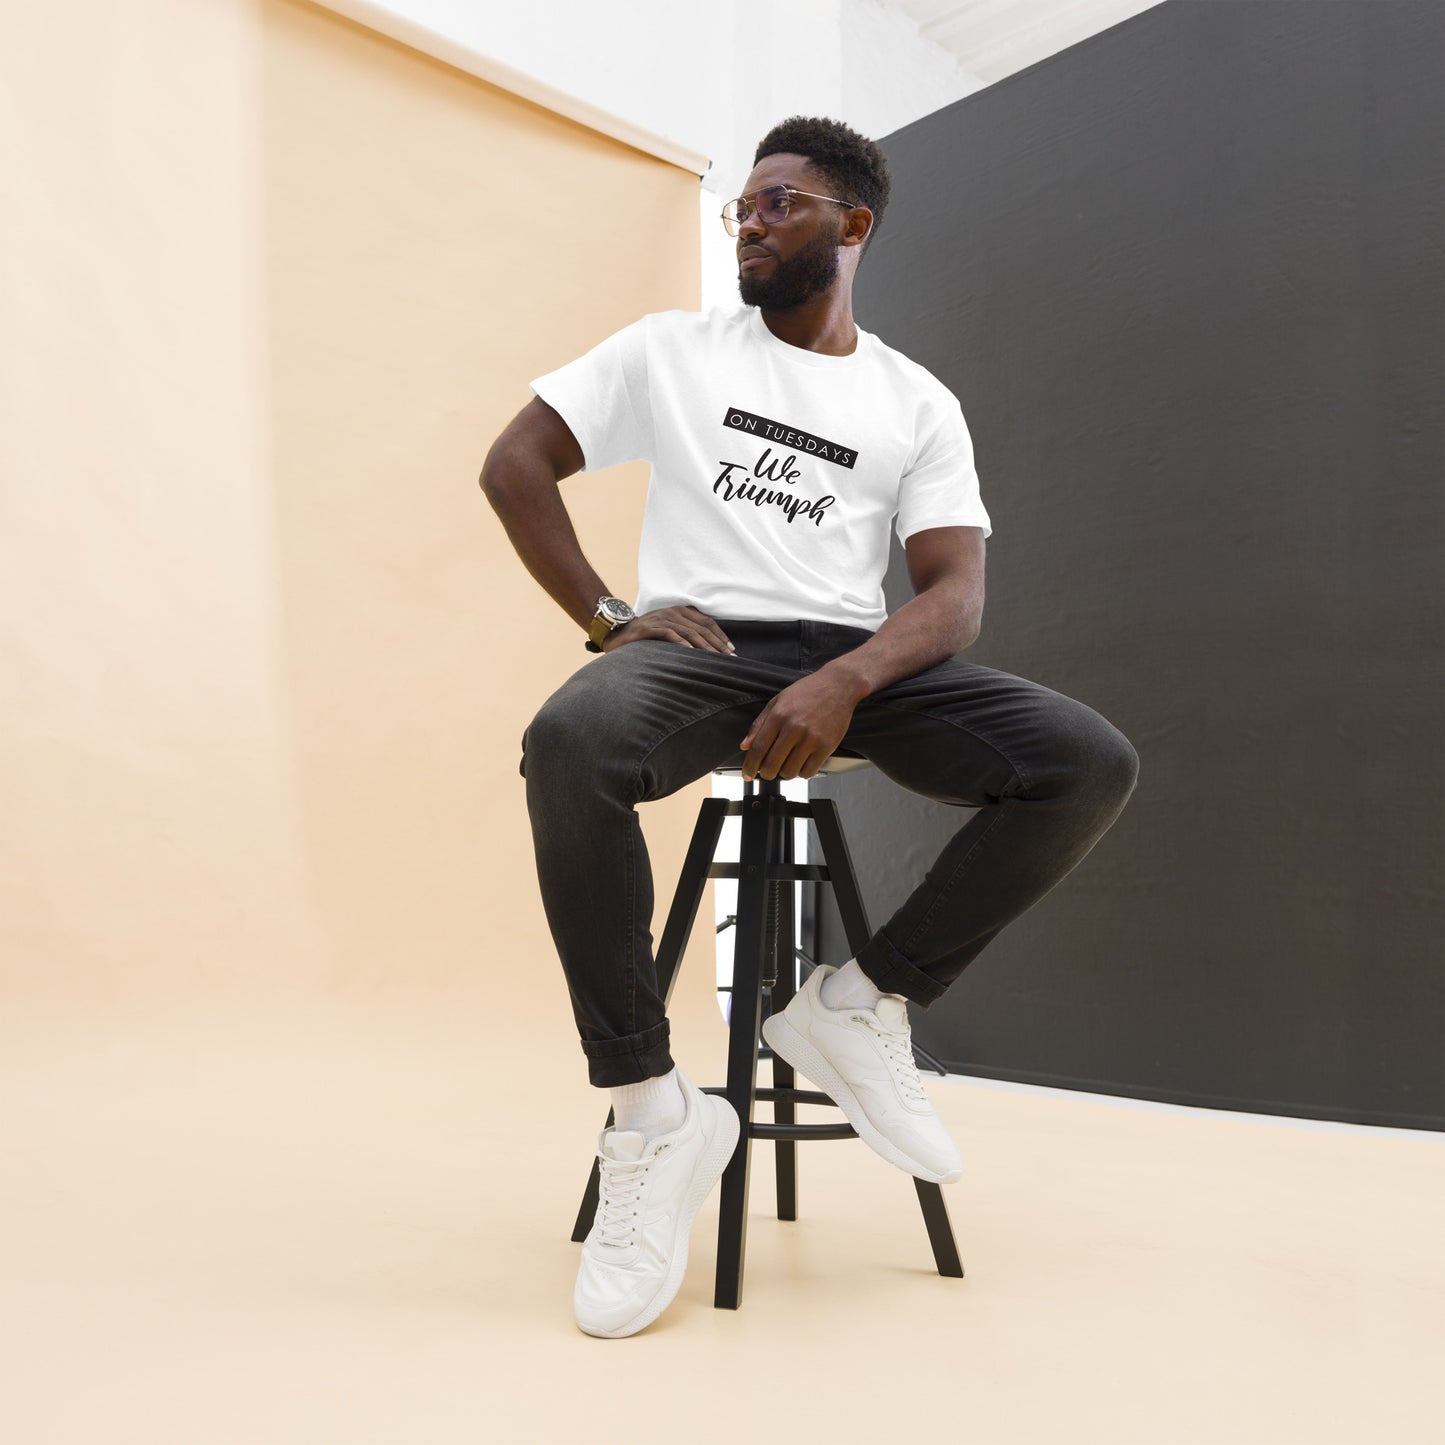 On Tuesday's We Triumph Men's classic tee